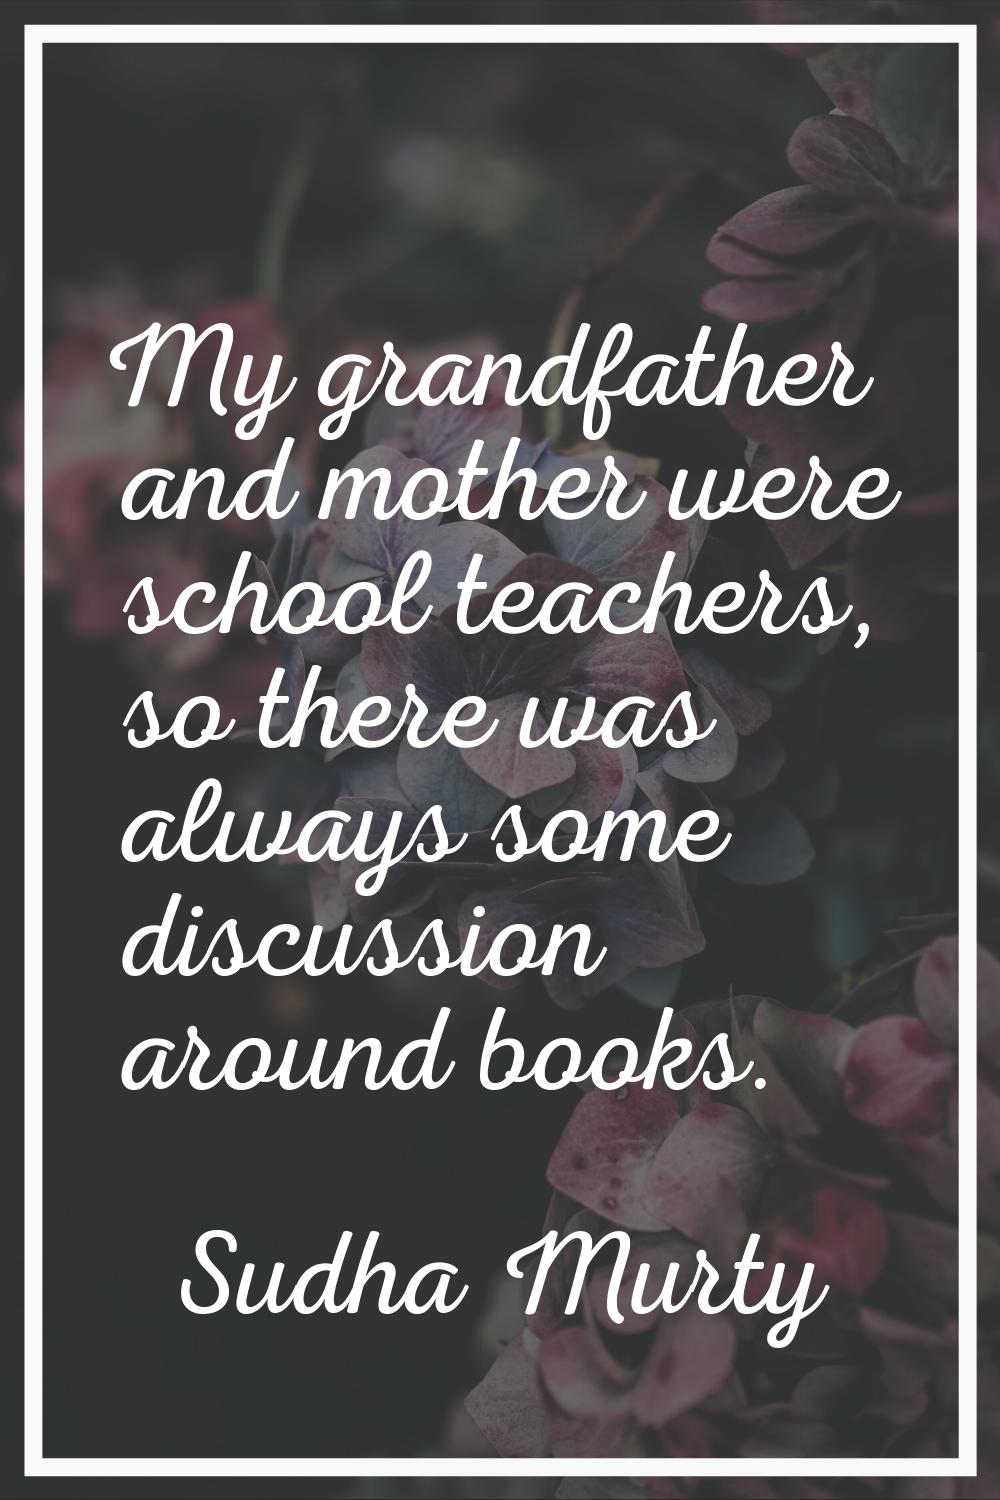 My grandfather and mother were school teachers, so there was always some discussion around books.